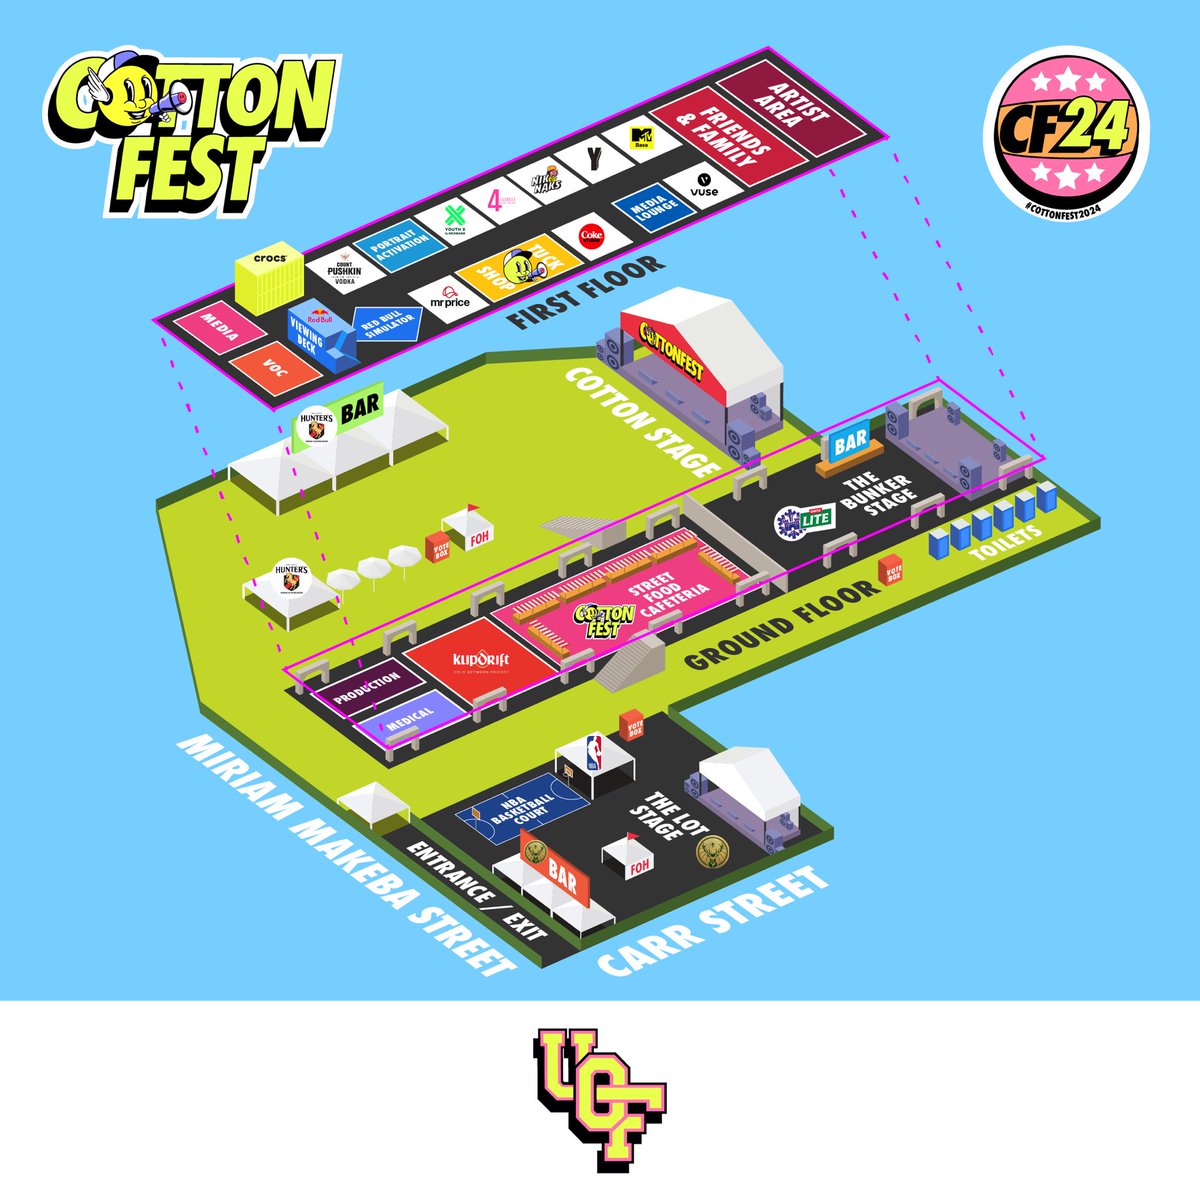 Cotton Eaters! 🙃 The fields are ready for UCF JOBURG Elections 🗳️ Get your drip ready for an experience to remember 🔥 Tickets are still available, follow the link in our bio to get yours 🎟 #cottonfest #johannesburg #votecottonfest #votemusic #votelifestyle #votefashion